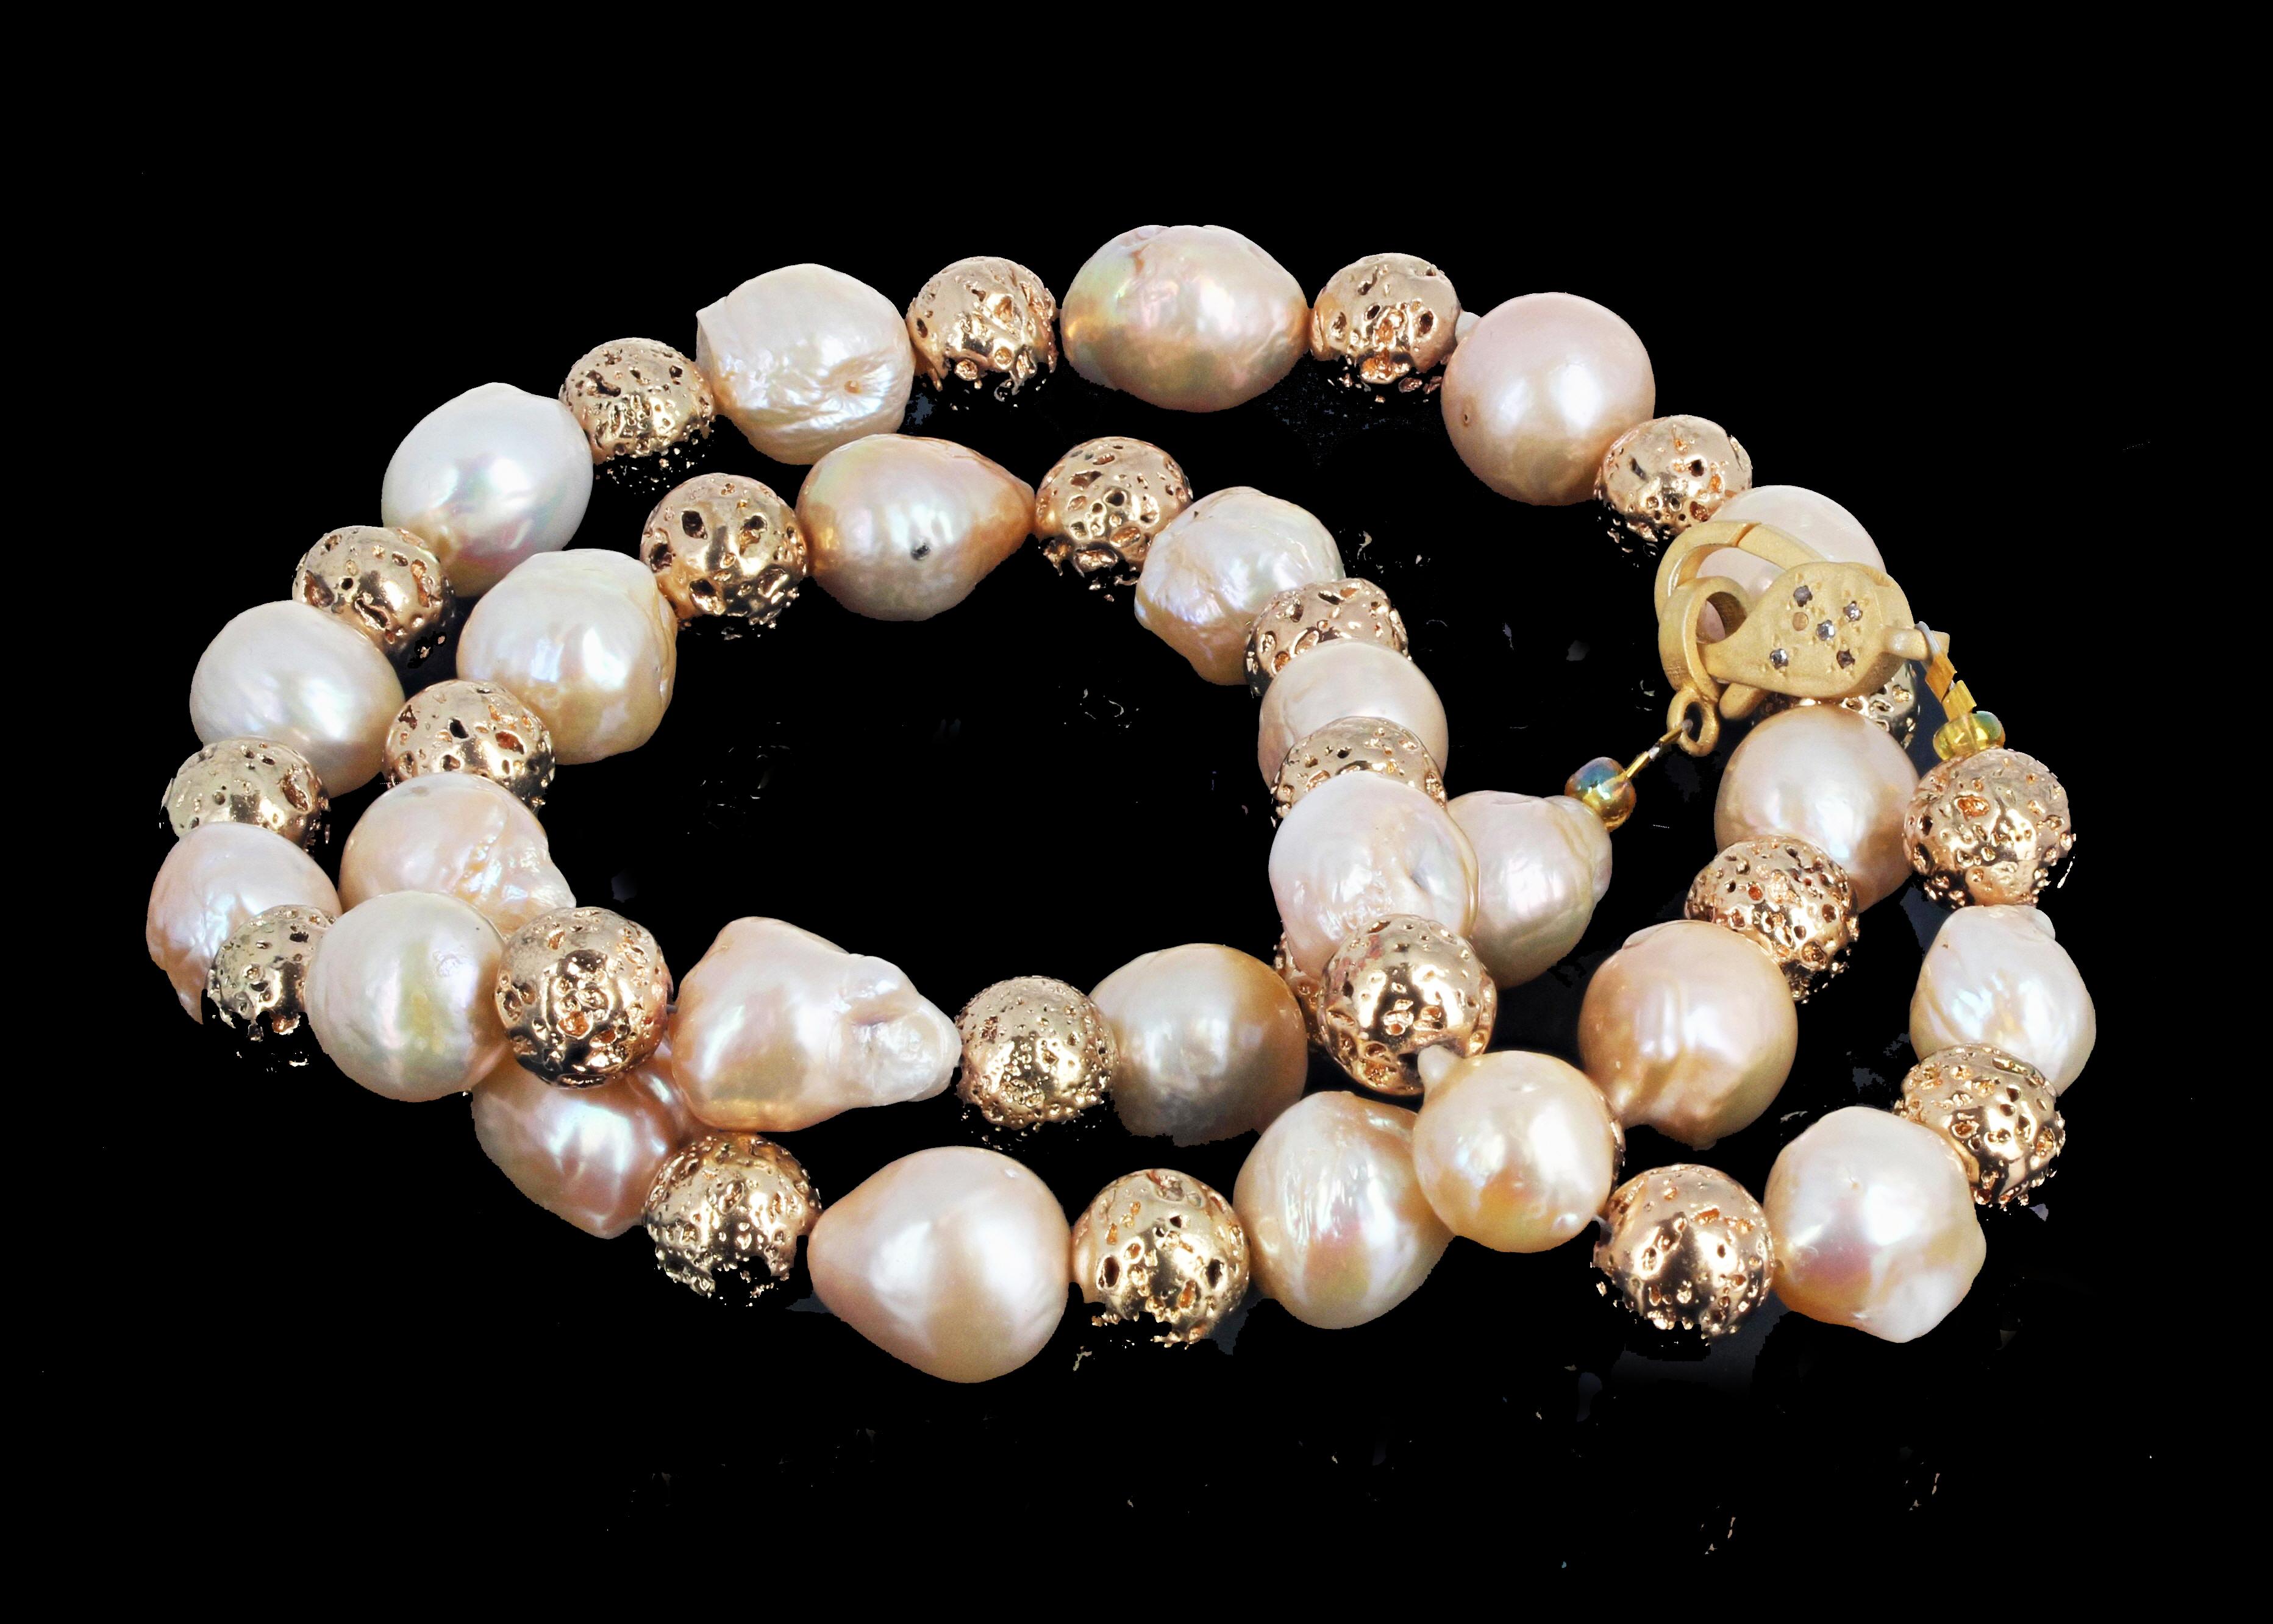 Large round Gold plated Lava Rock enhances these gorgeous slightly goldy tone natural ocean cultured Pearls in this magnificent 26 inch long necklace.  The clasp is gold plated silver set with real tiny brilliant white diamonds. The pearls, although